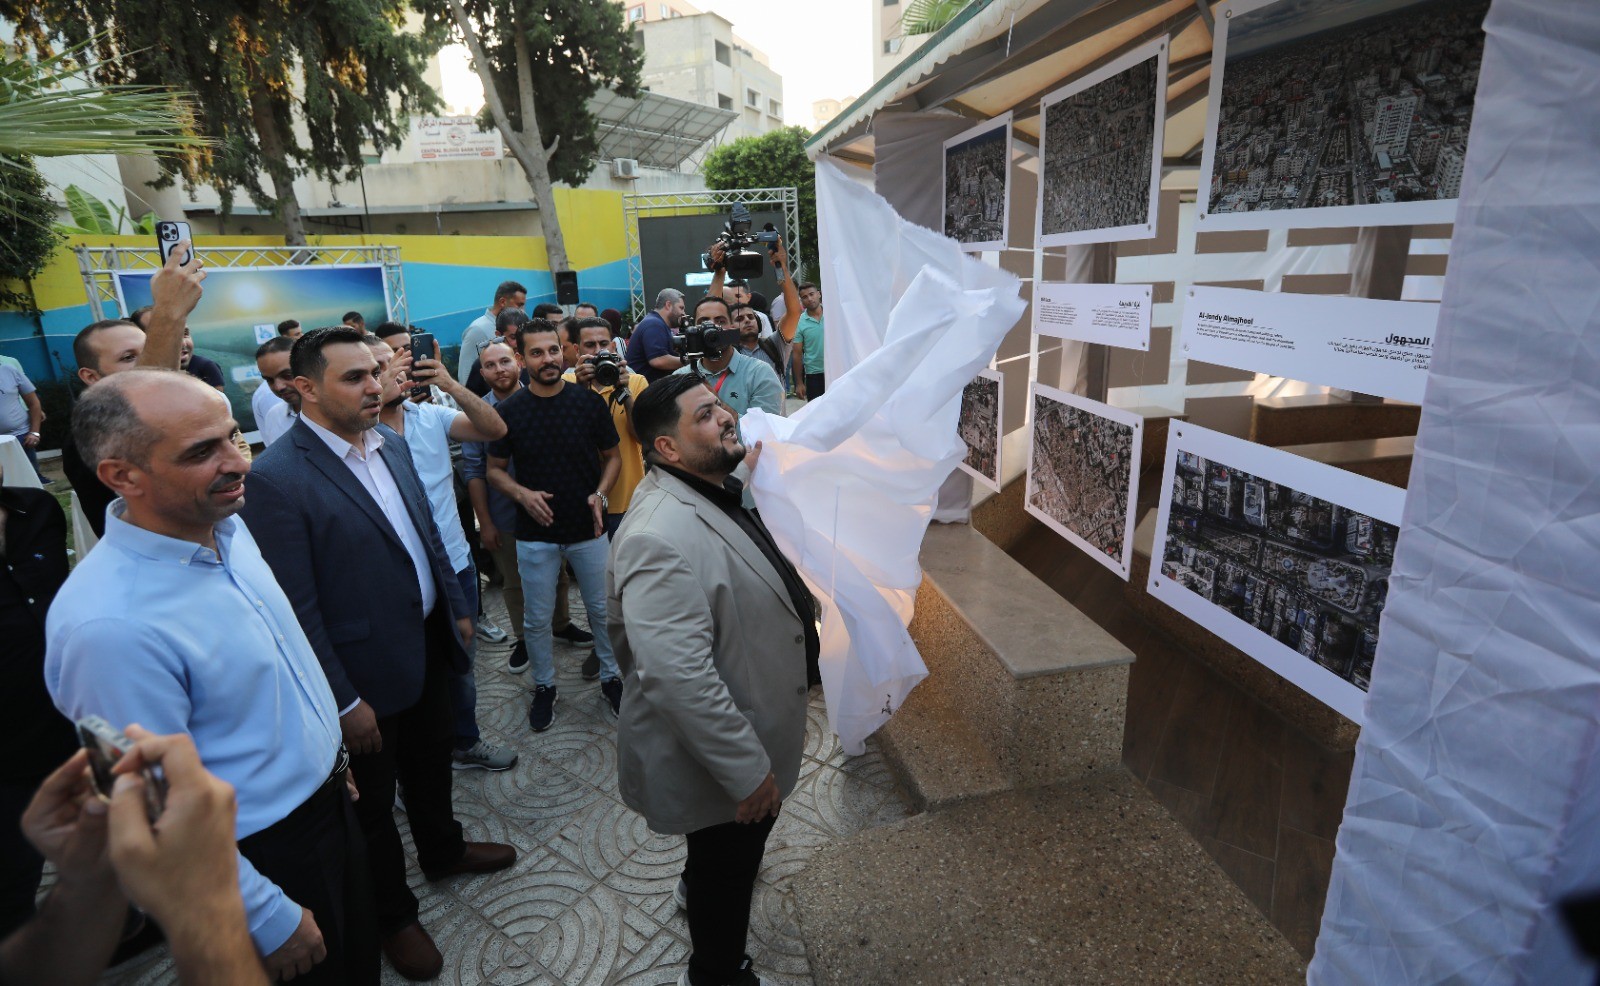 Opening of the exhibition "Gaza from the sky"